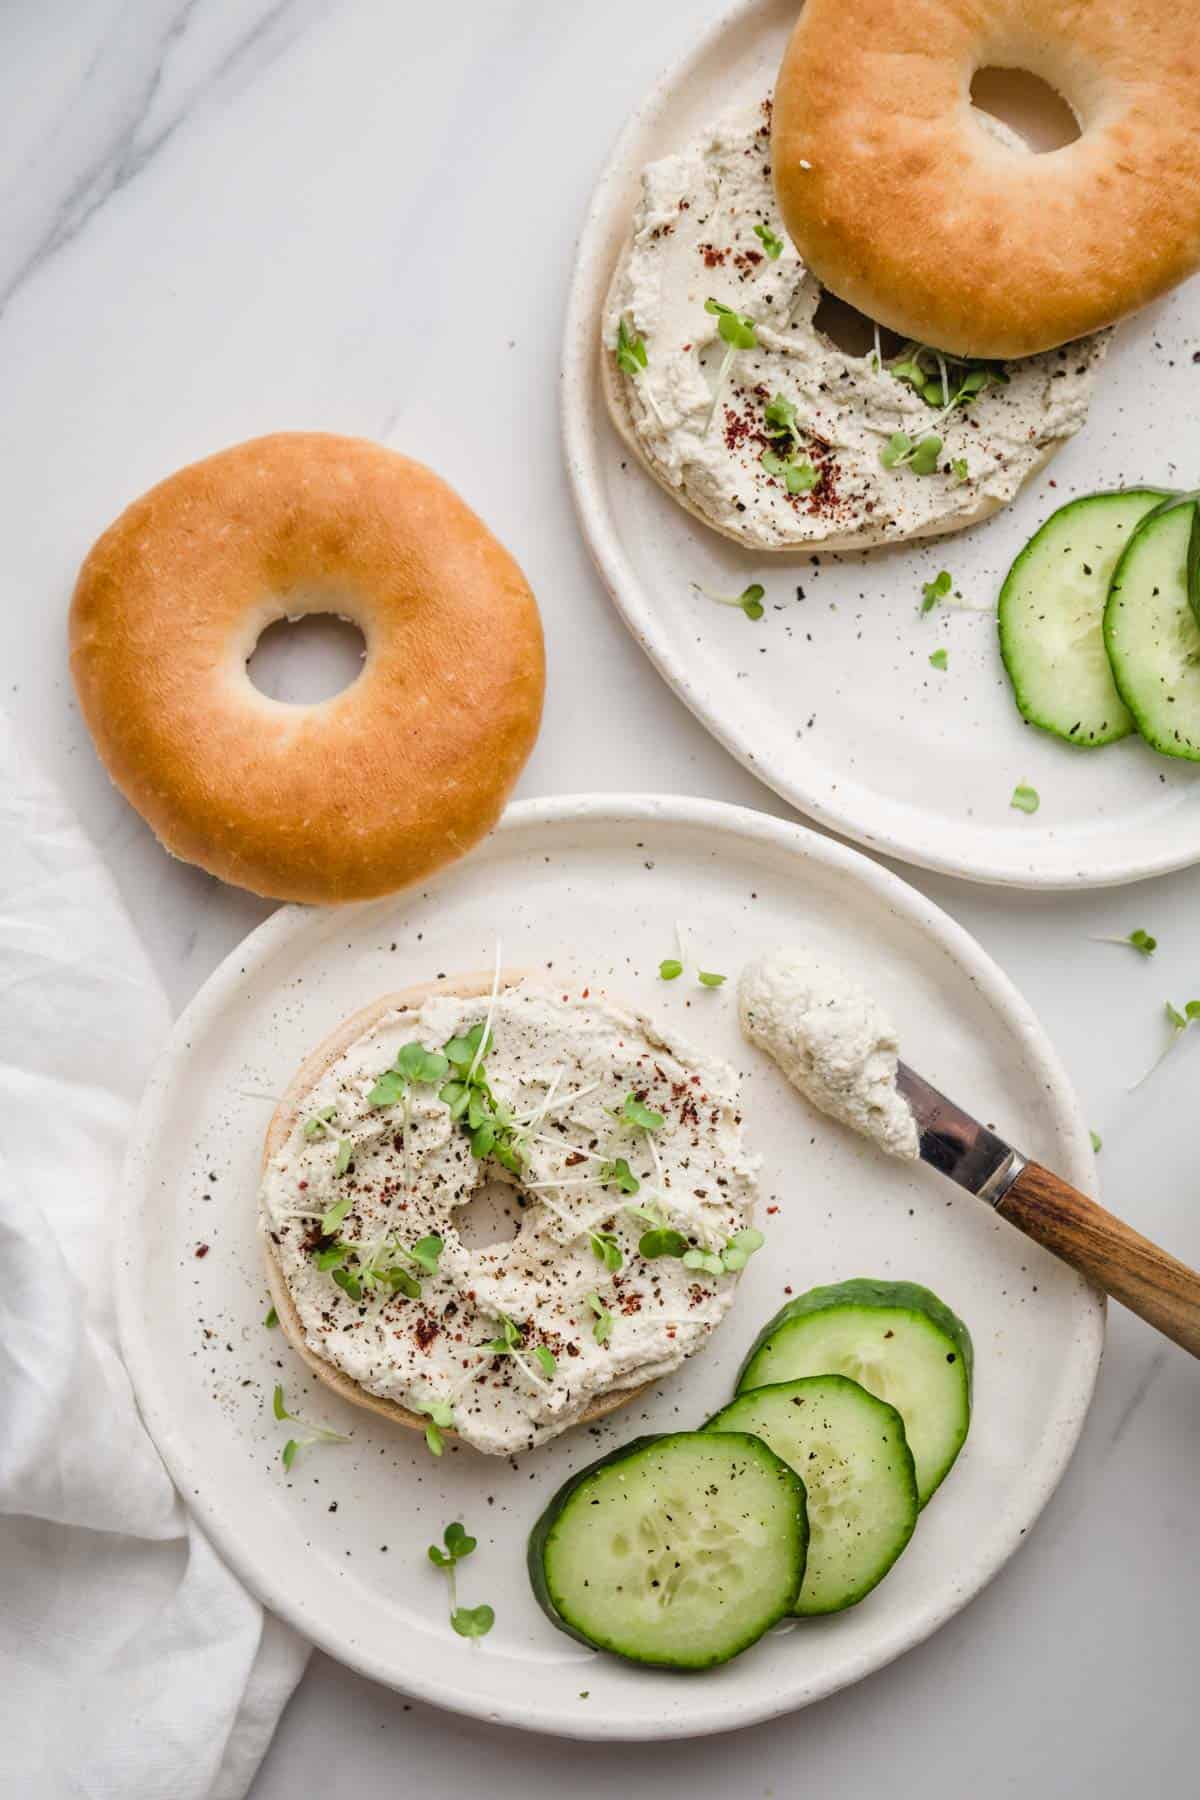 2 plates with sliced bagels and cream cheese, cucumber slices and water cress